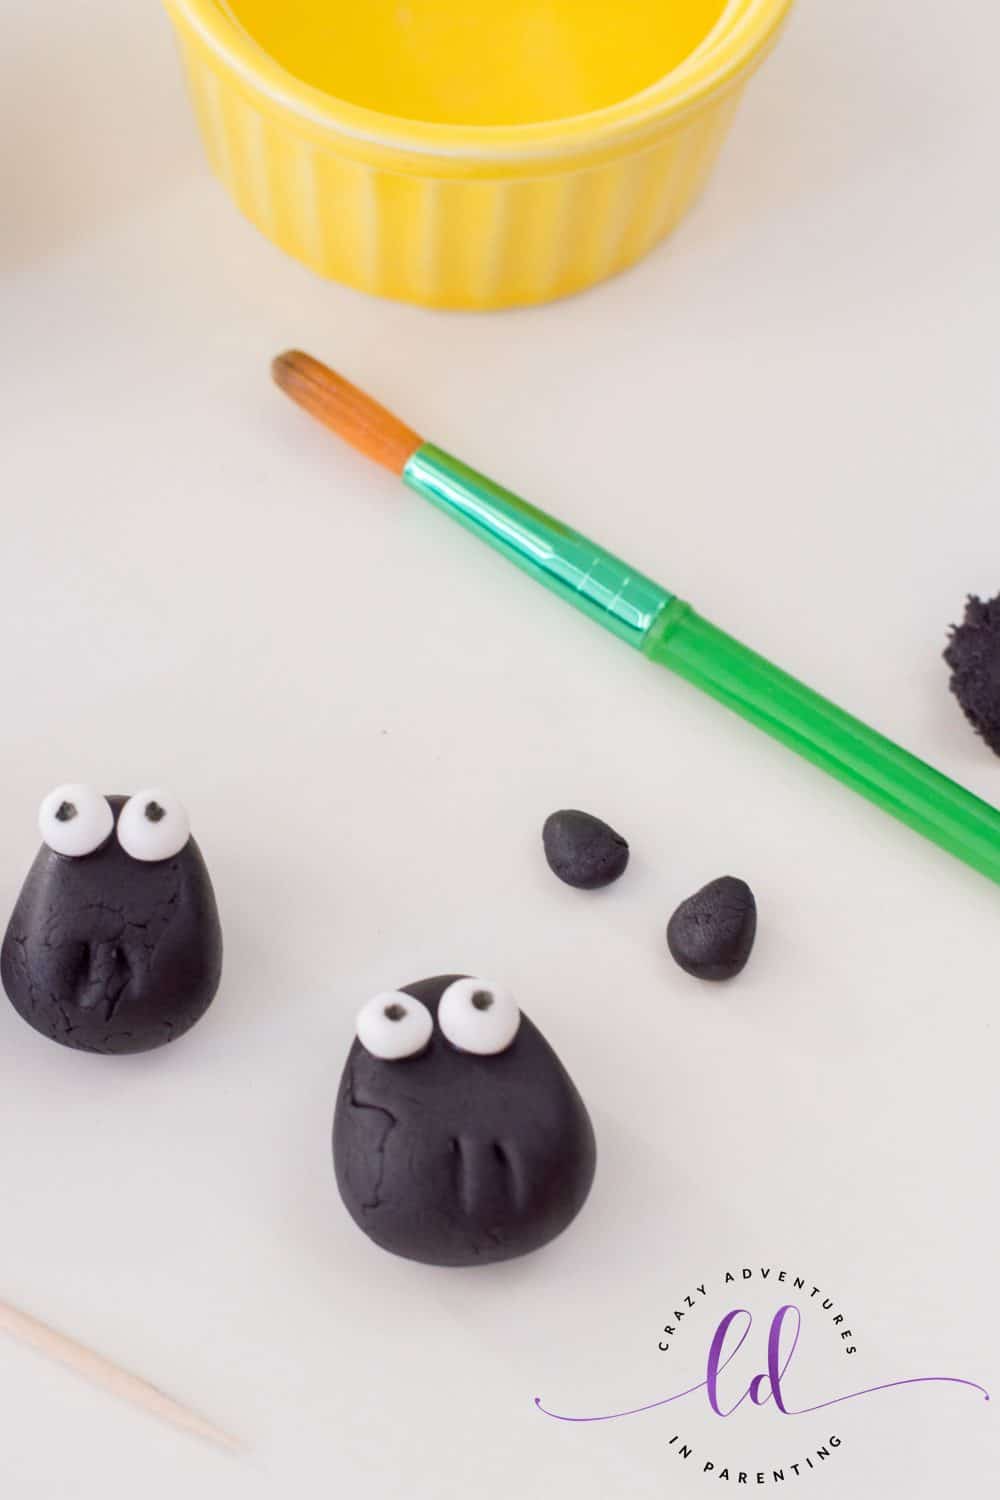 Creating Ears from Black Fondant for Sheep Cupcakes